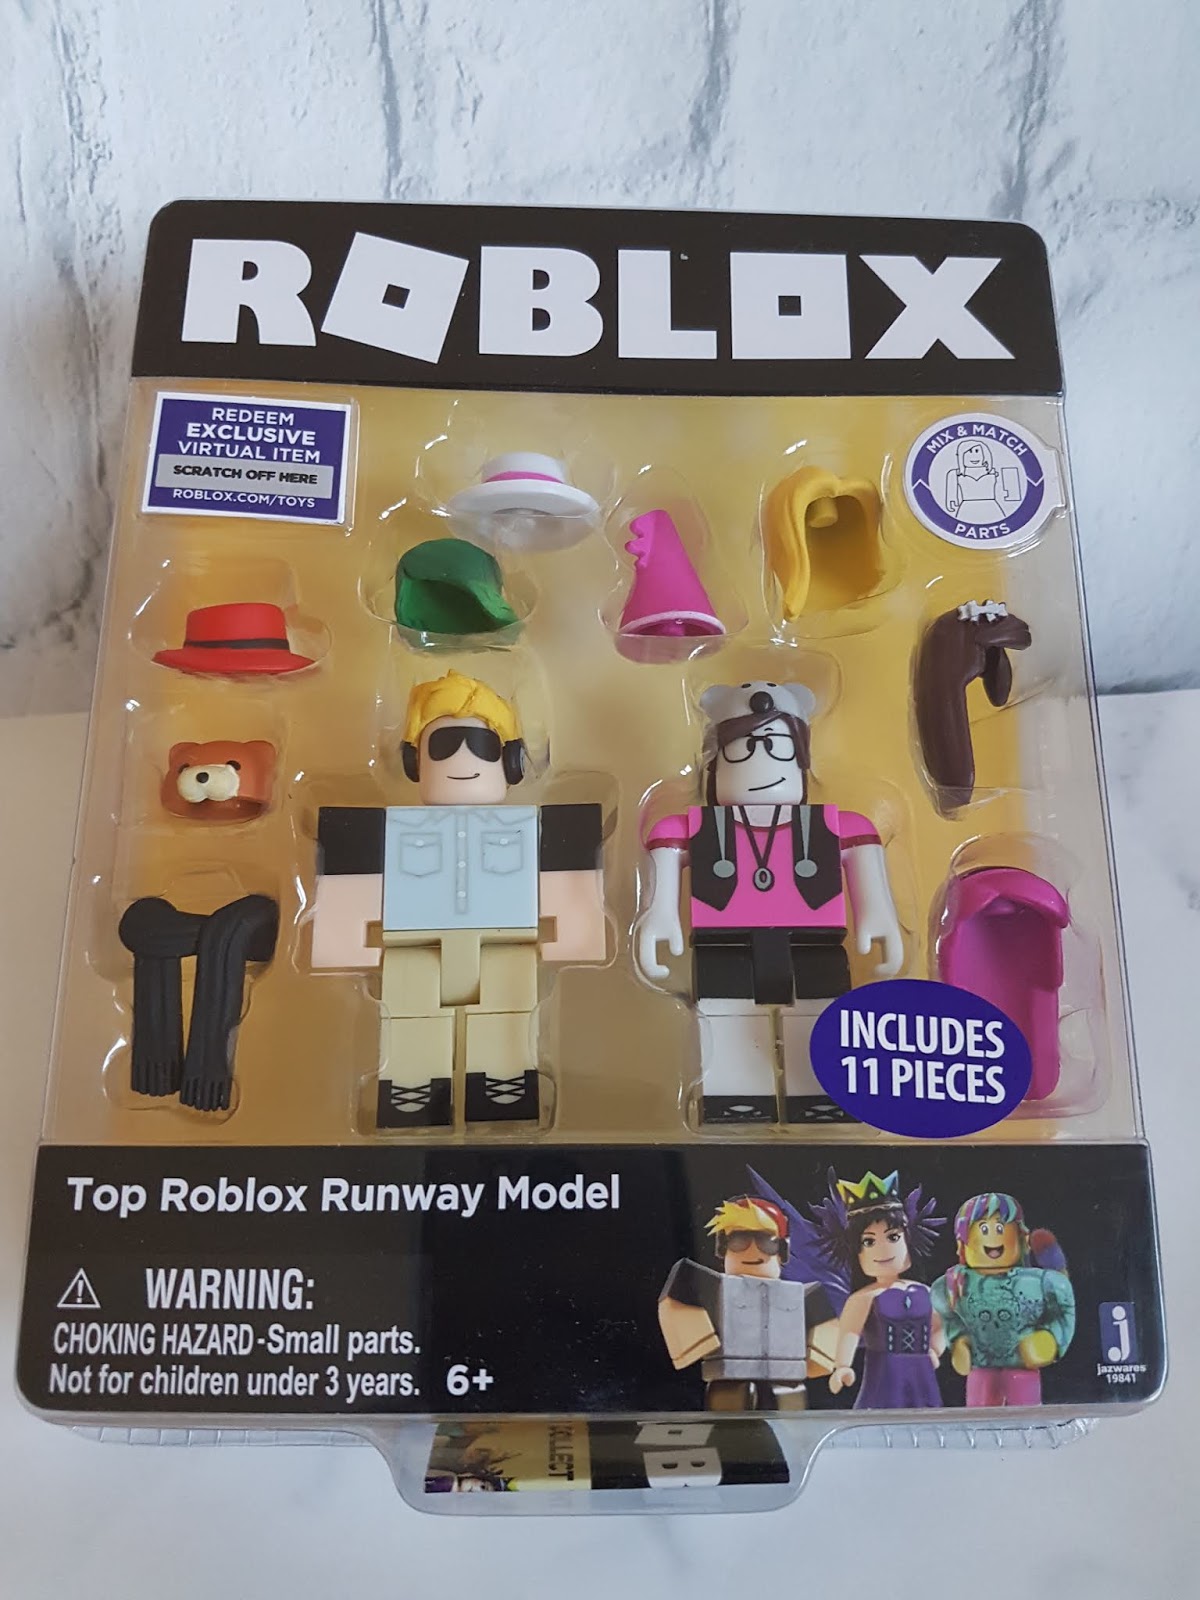 Mummy Of 3 Diaries Roblox Celebrity Series 1 Review - top roblox runway model roblox toy from series 3 mystery boxes